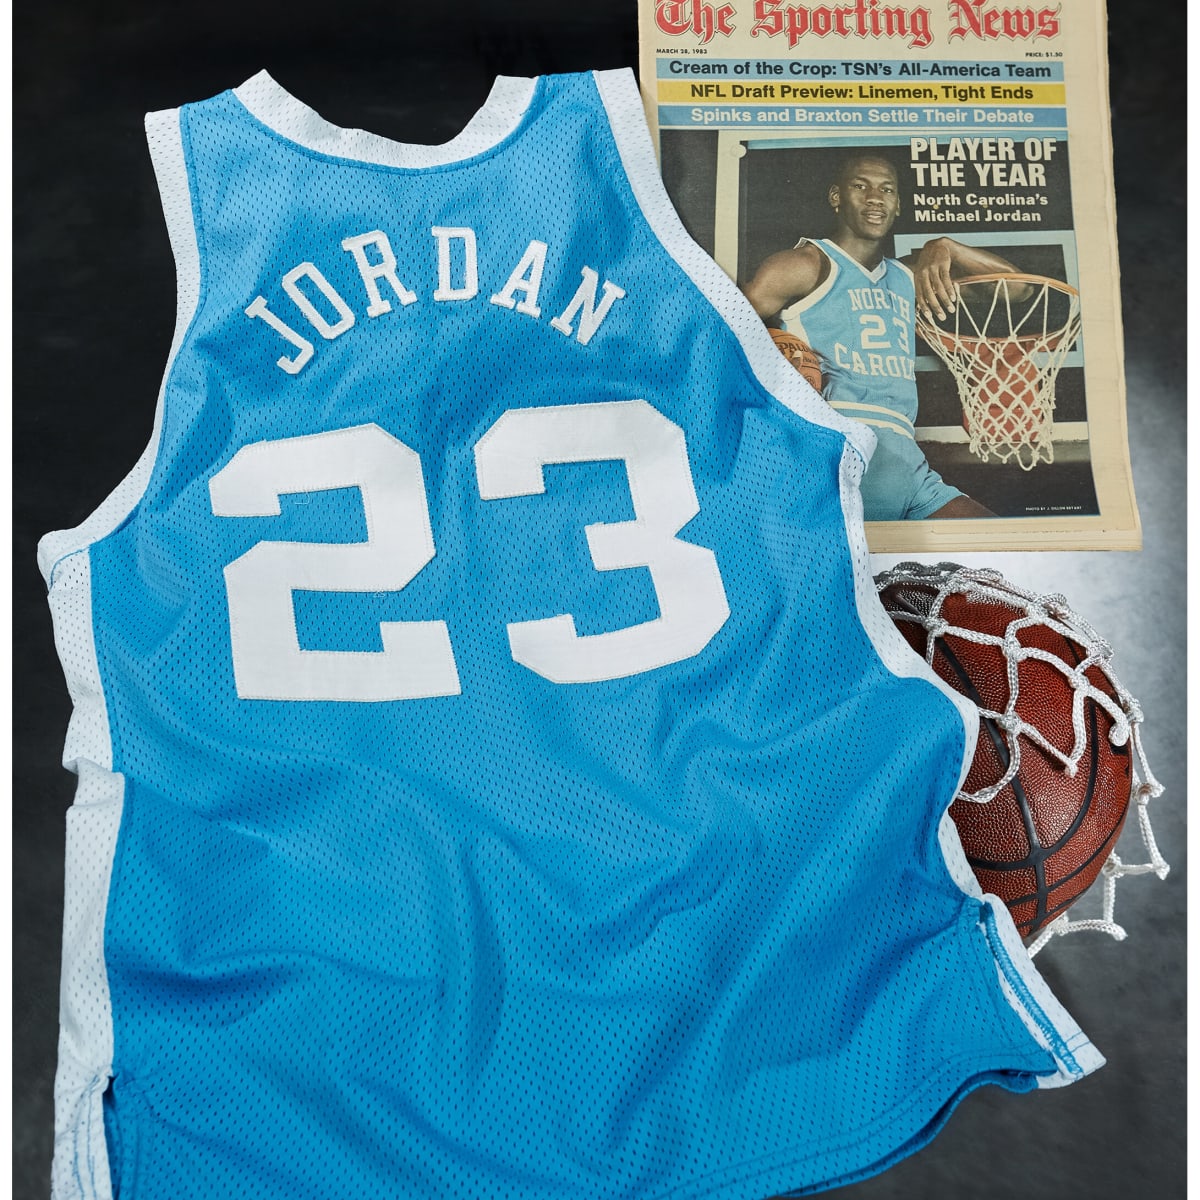 Michael Jordan Game-Worn Jersey For Sale, Expected To Sell For Quarter-Mil!!